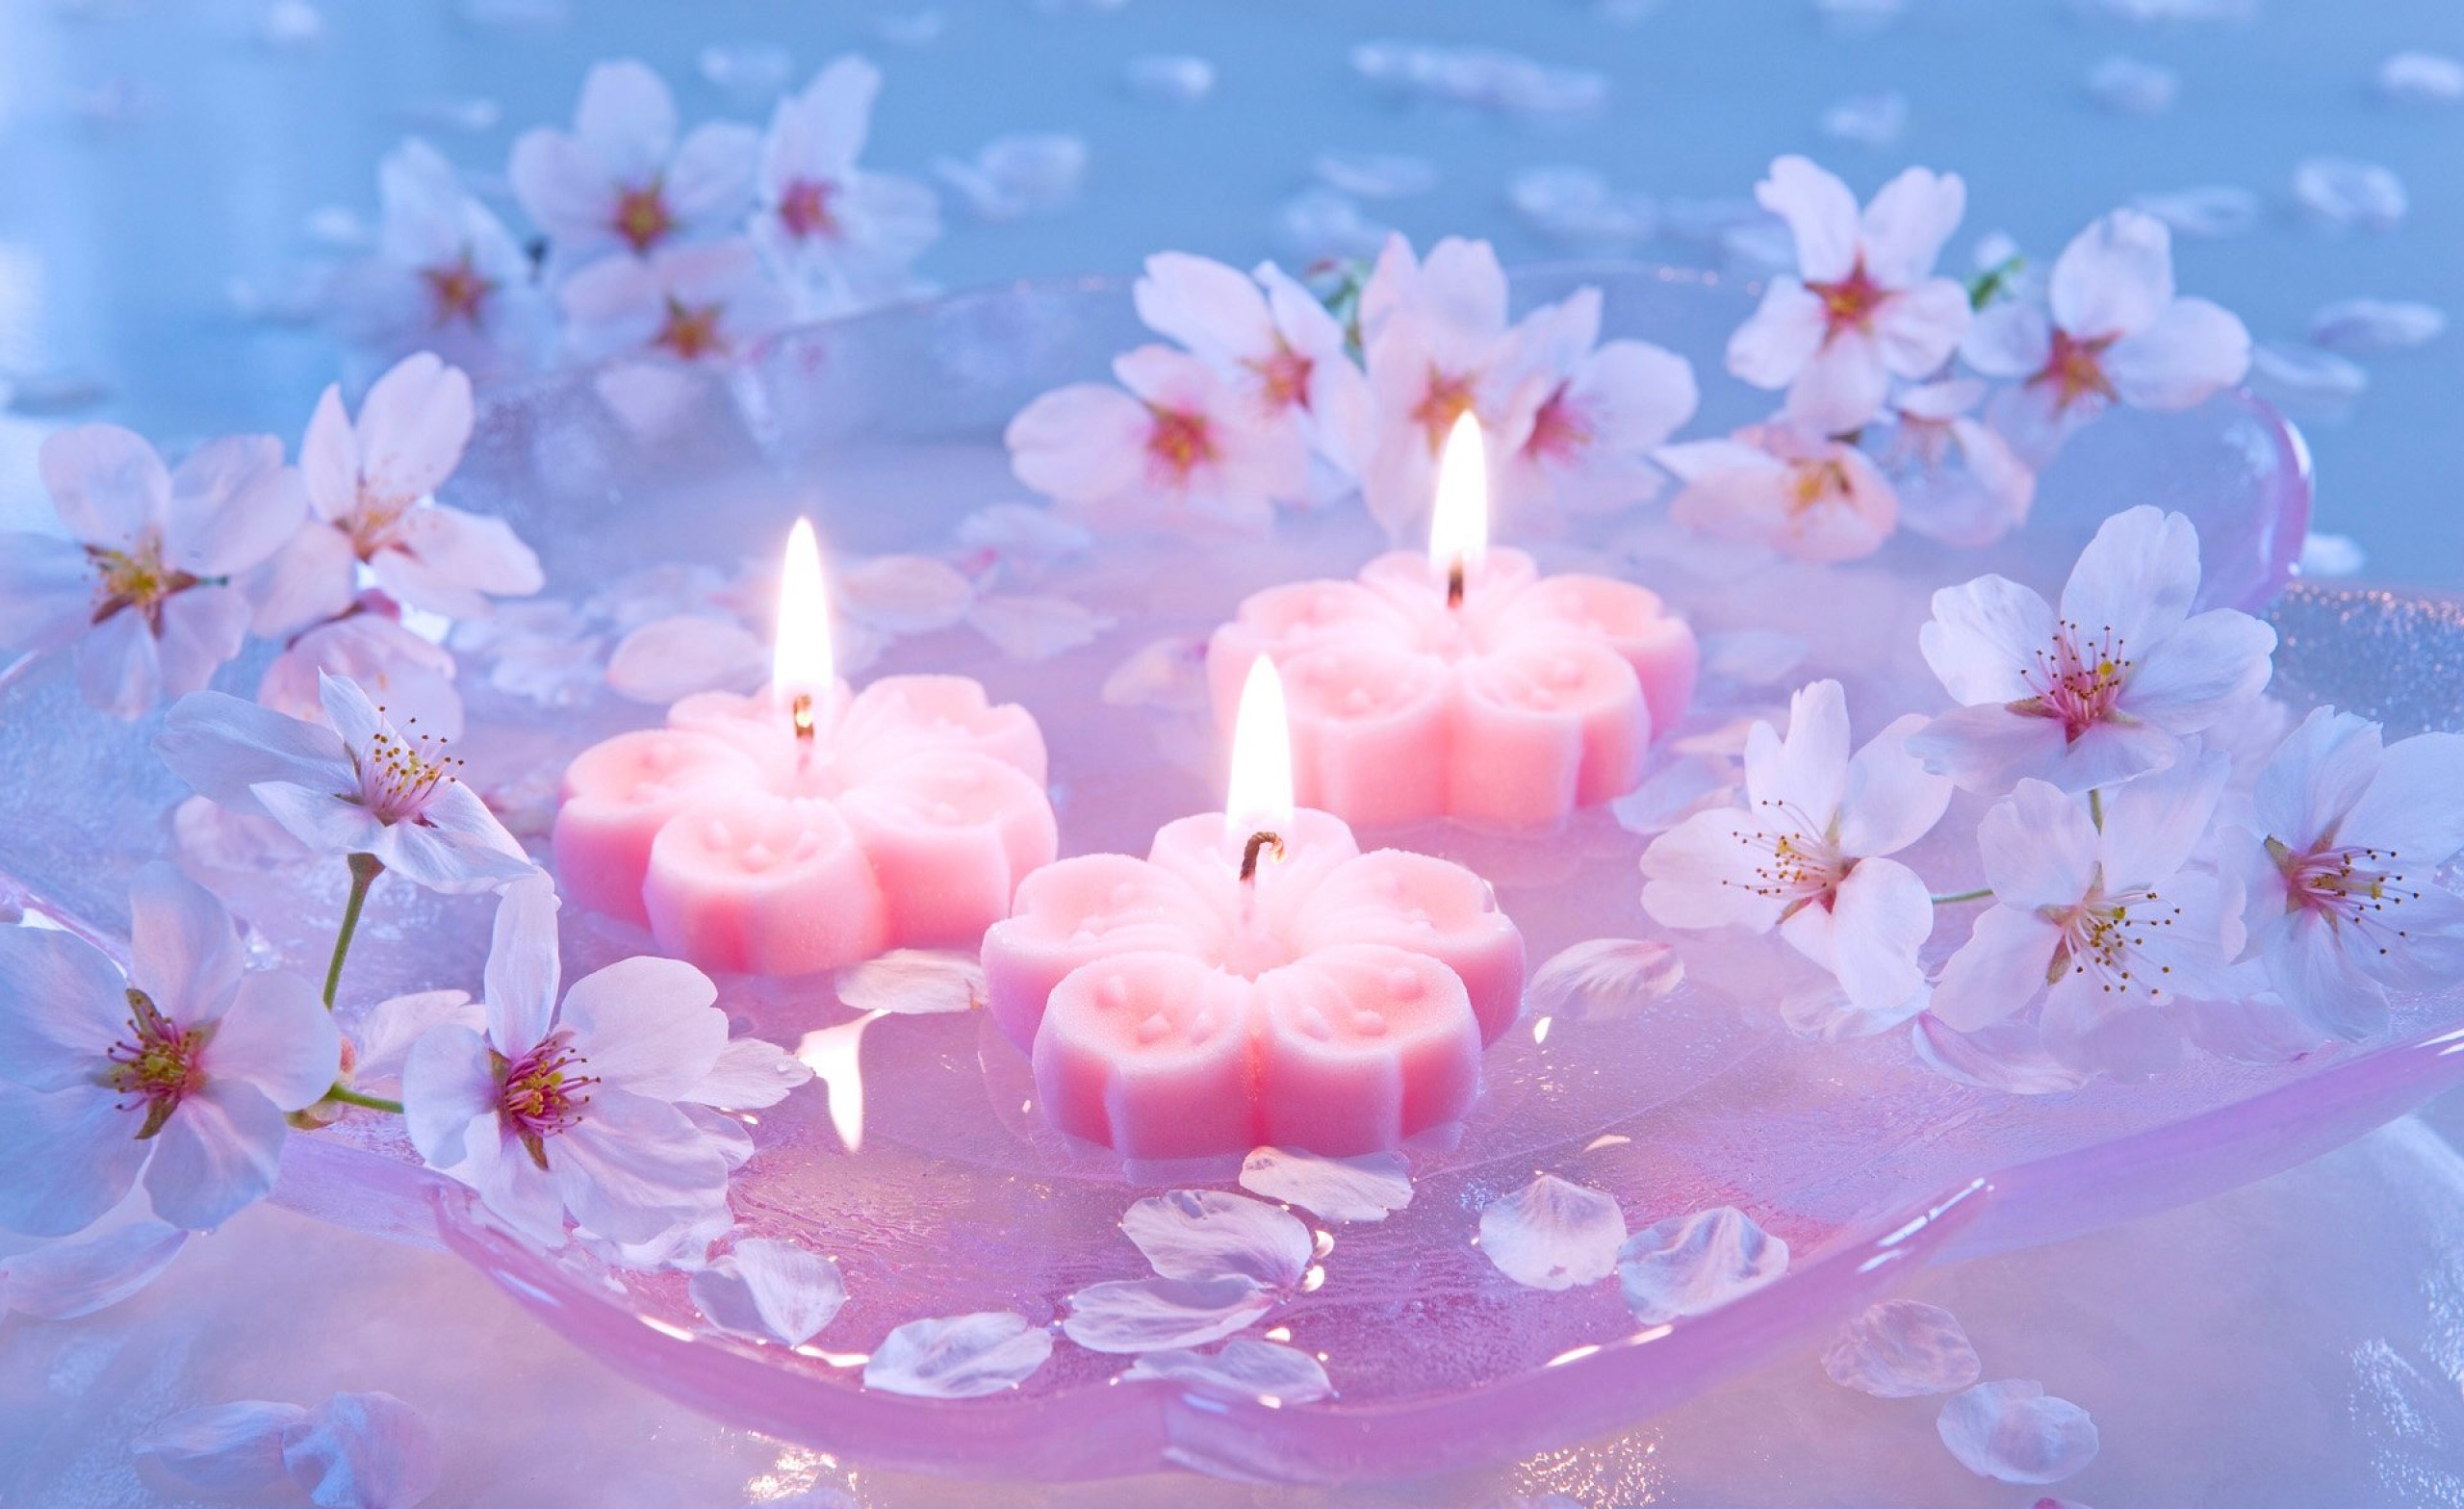 Candles And Cherry Flowers X Close